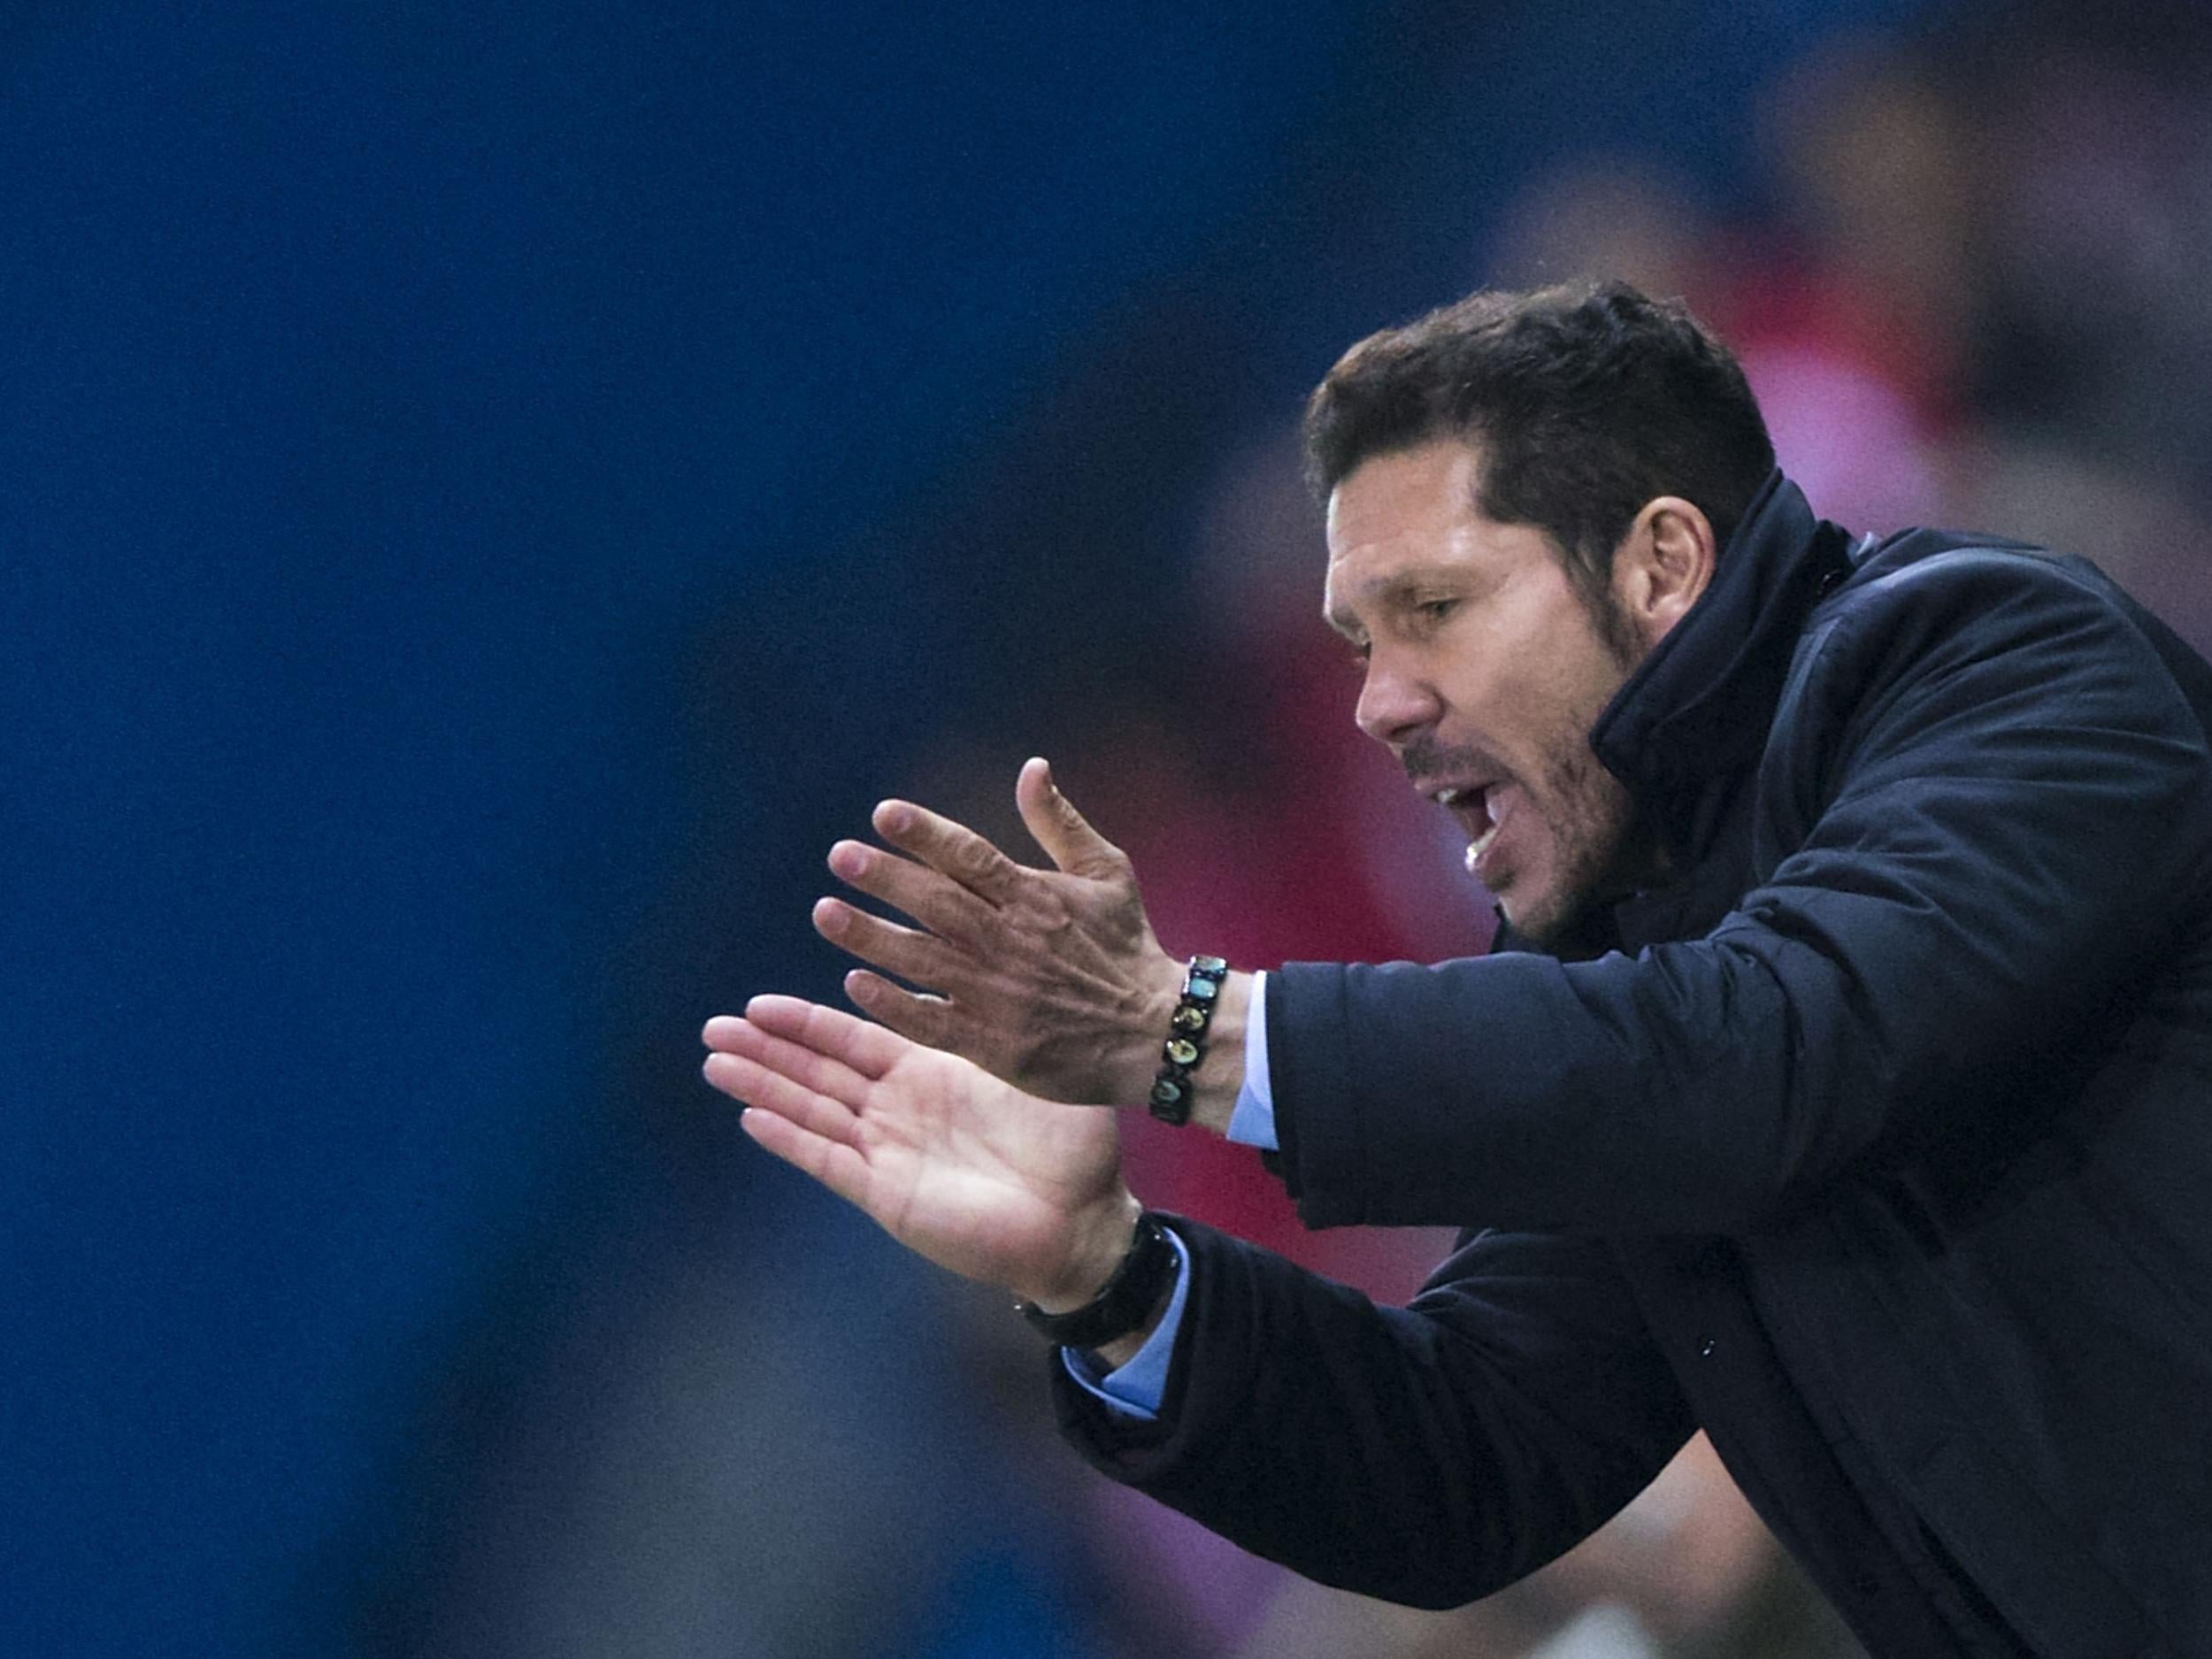 Simeone is confident despite the absence of Jose Gimenez and Juanfran